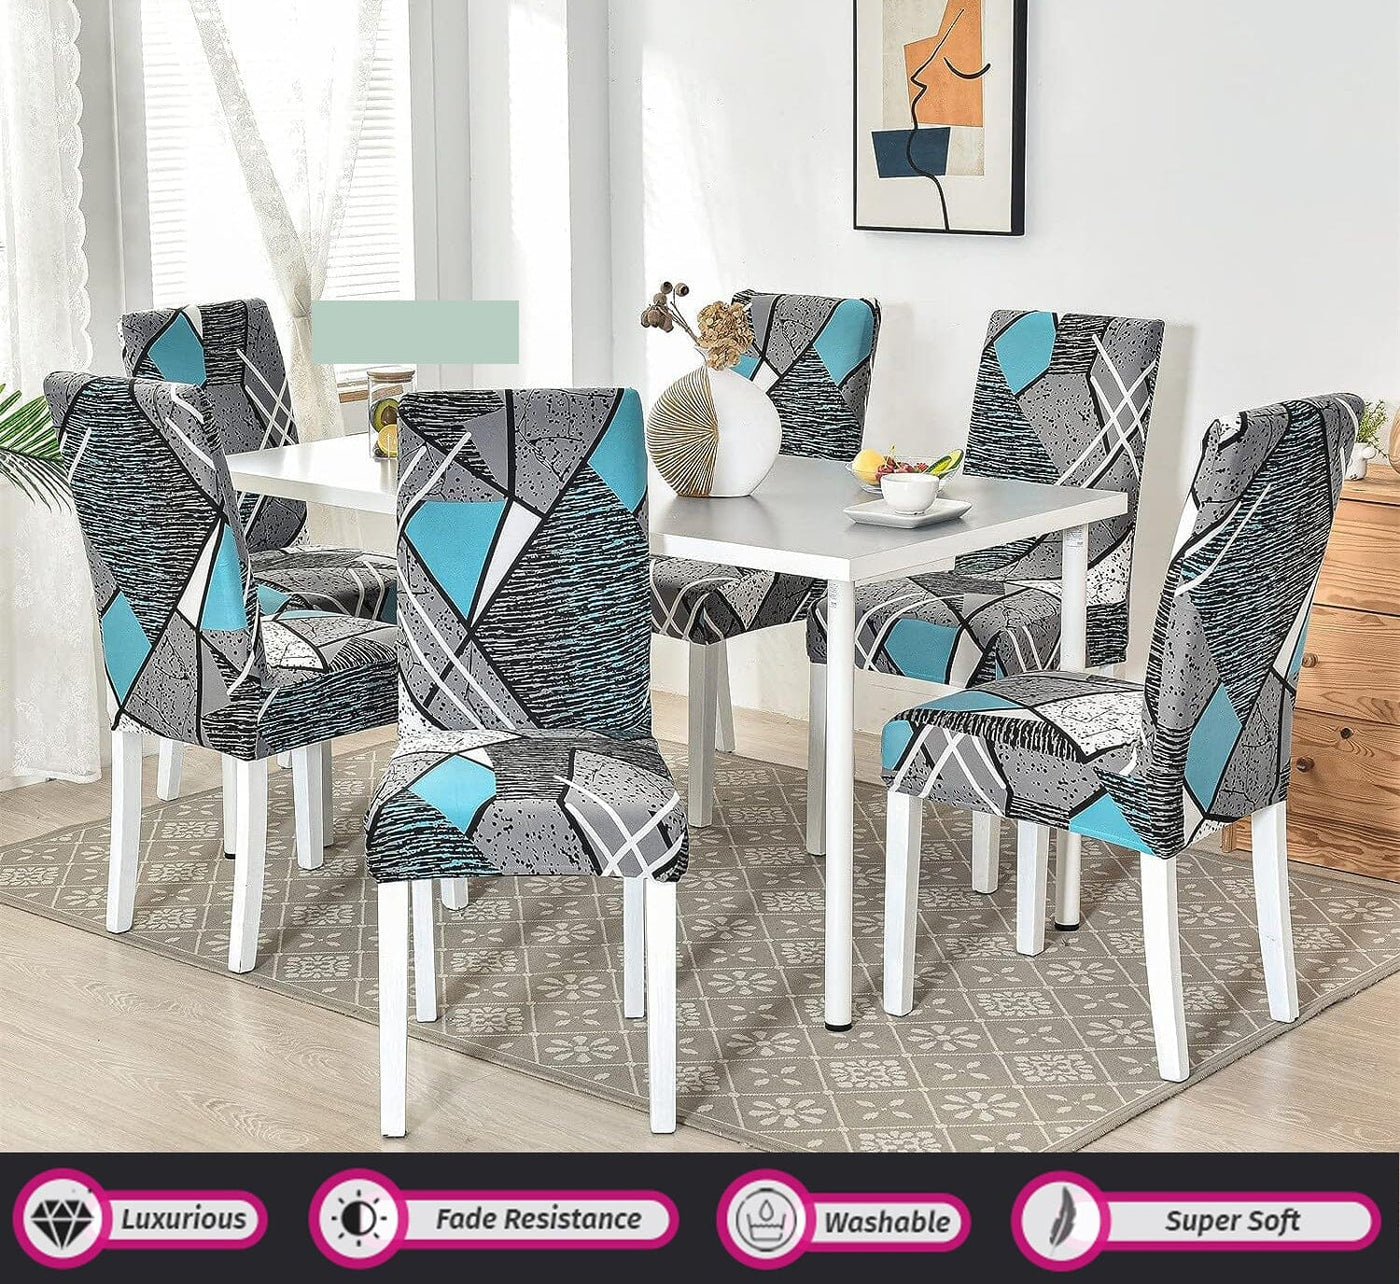 Premium Chair Cover - Stretchable & Elastic Fitted Great Happy IN Grey Blue Prism 2 PCS - ₹799 